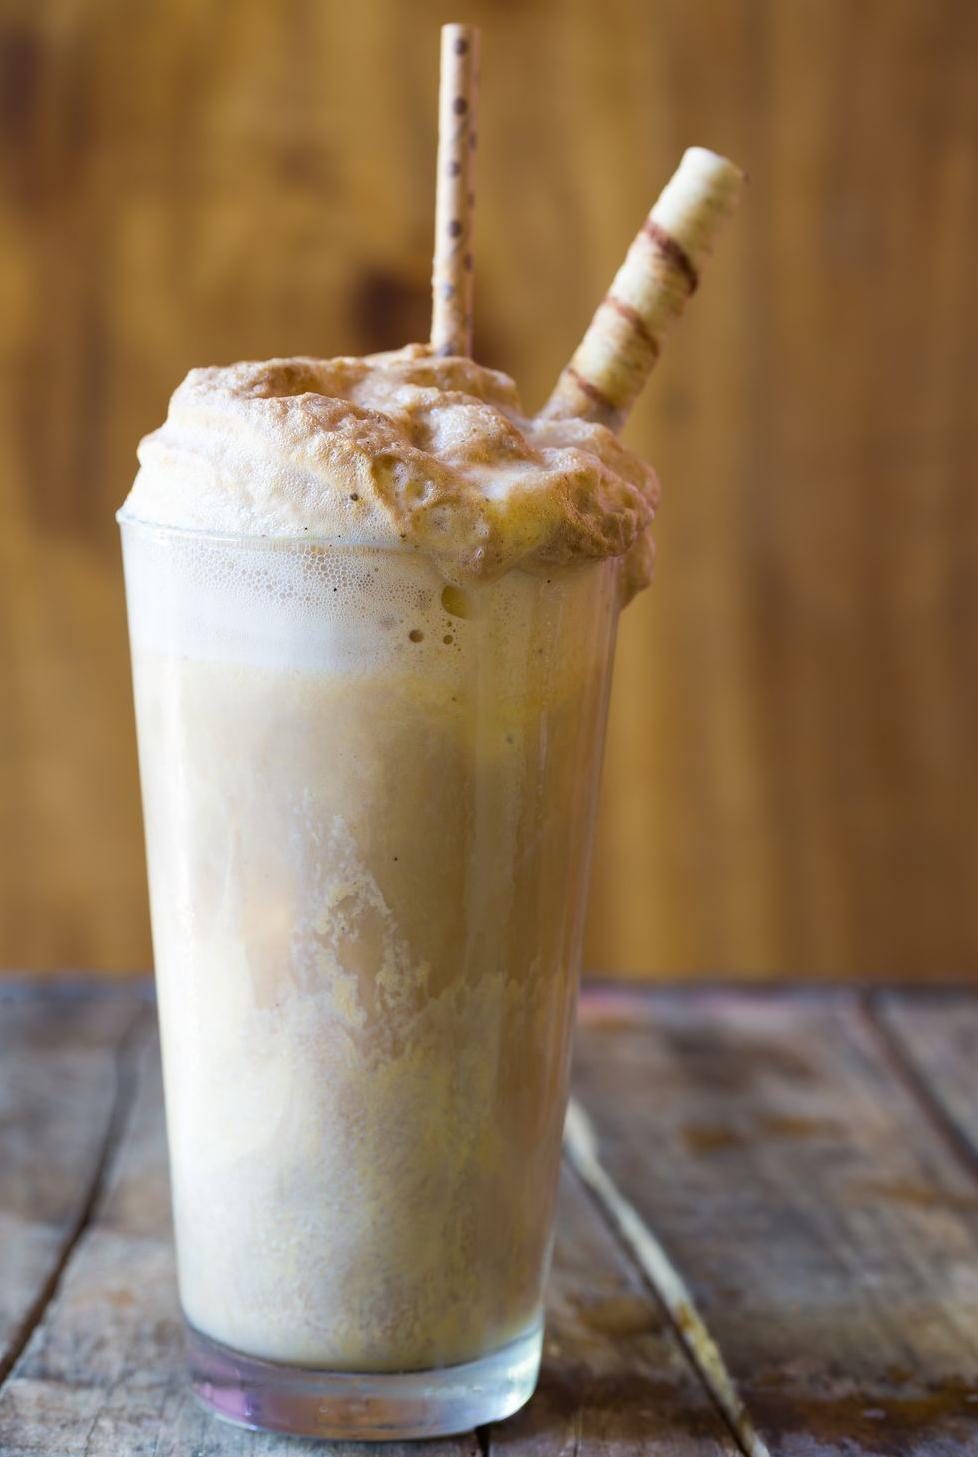  Say goodbye to basic lattes and hello to this unforgettable fall favorite.